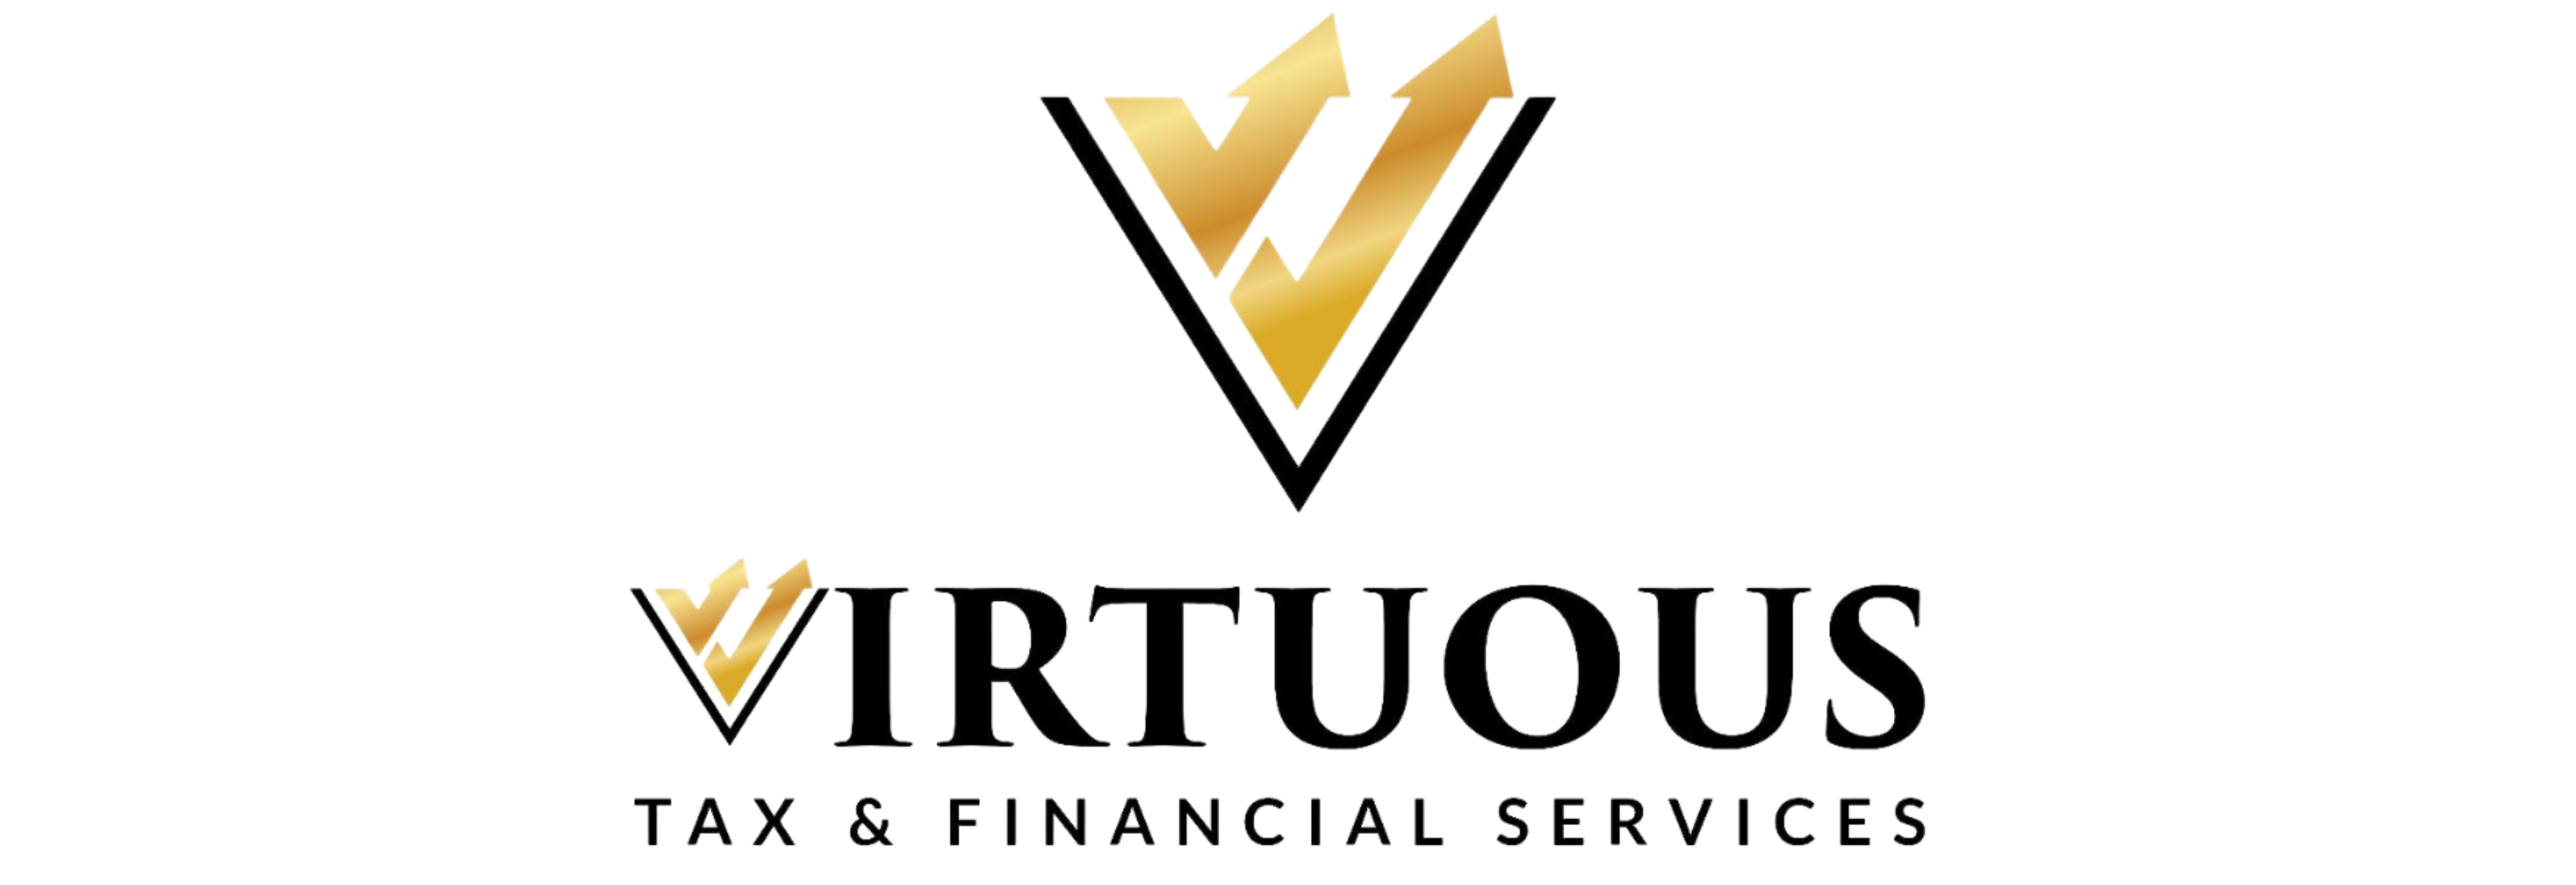 Virtuous Tax Financial